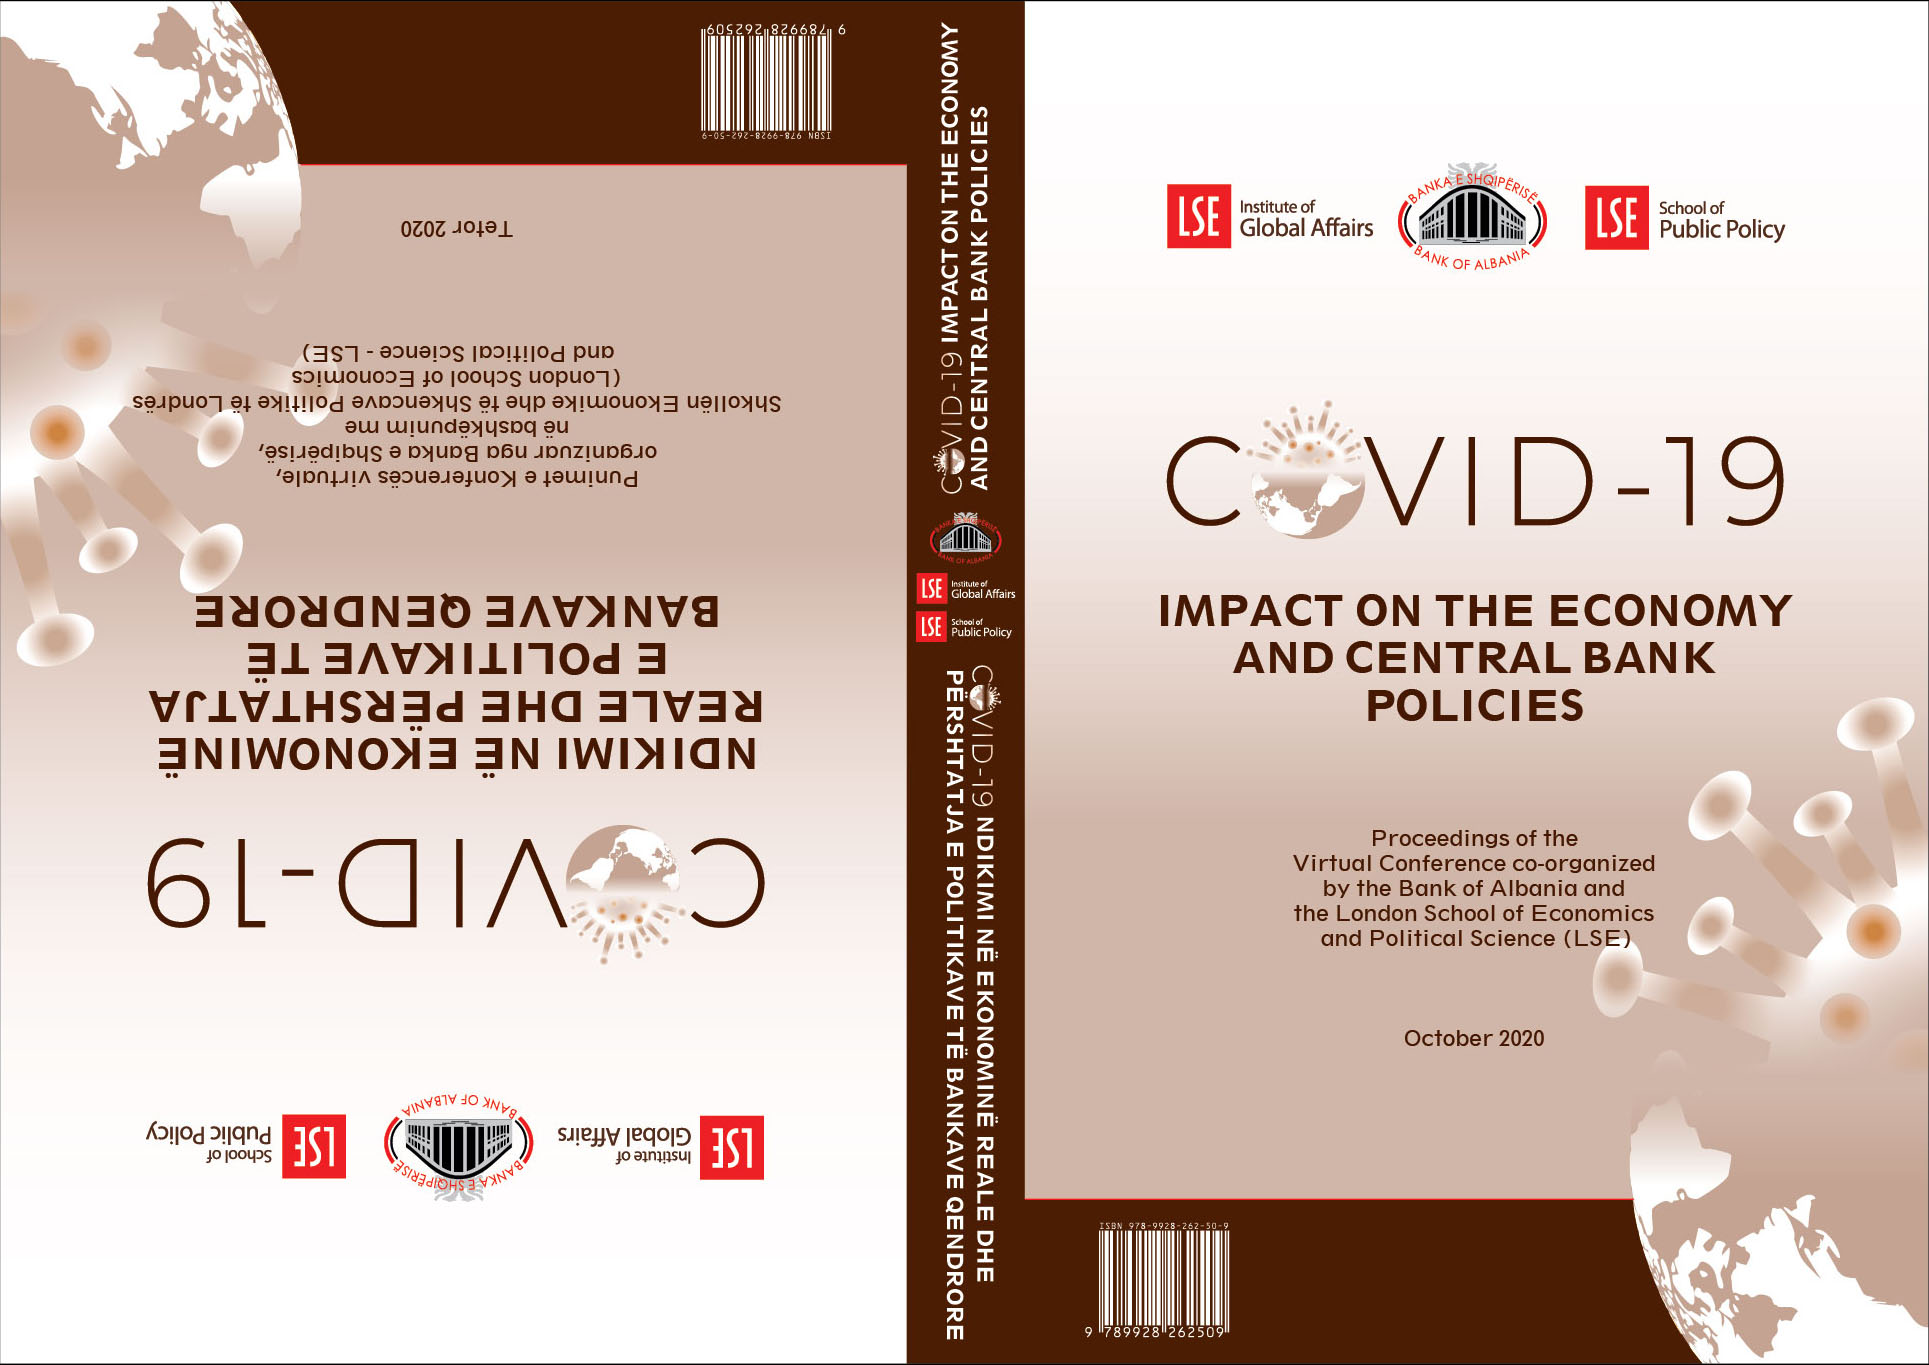 COVID-19: Impact on the Economy and Central Bank Policies